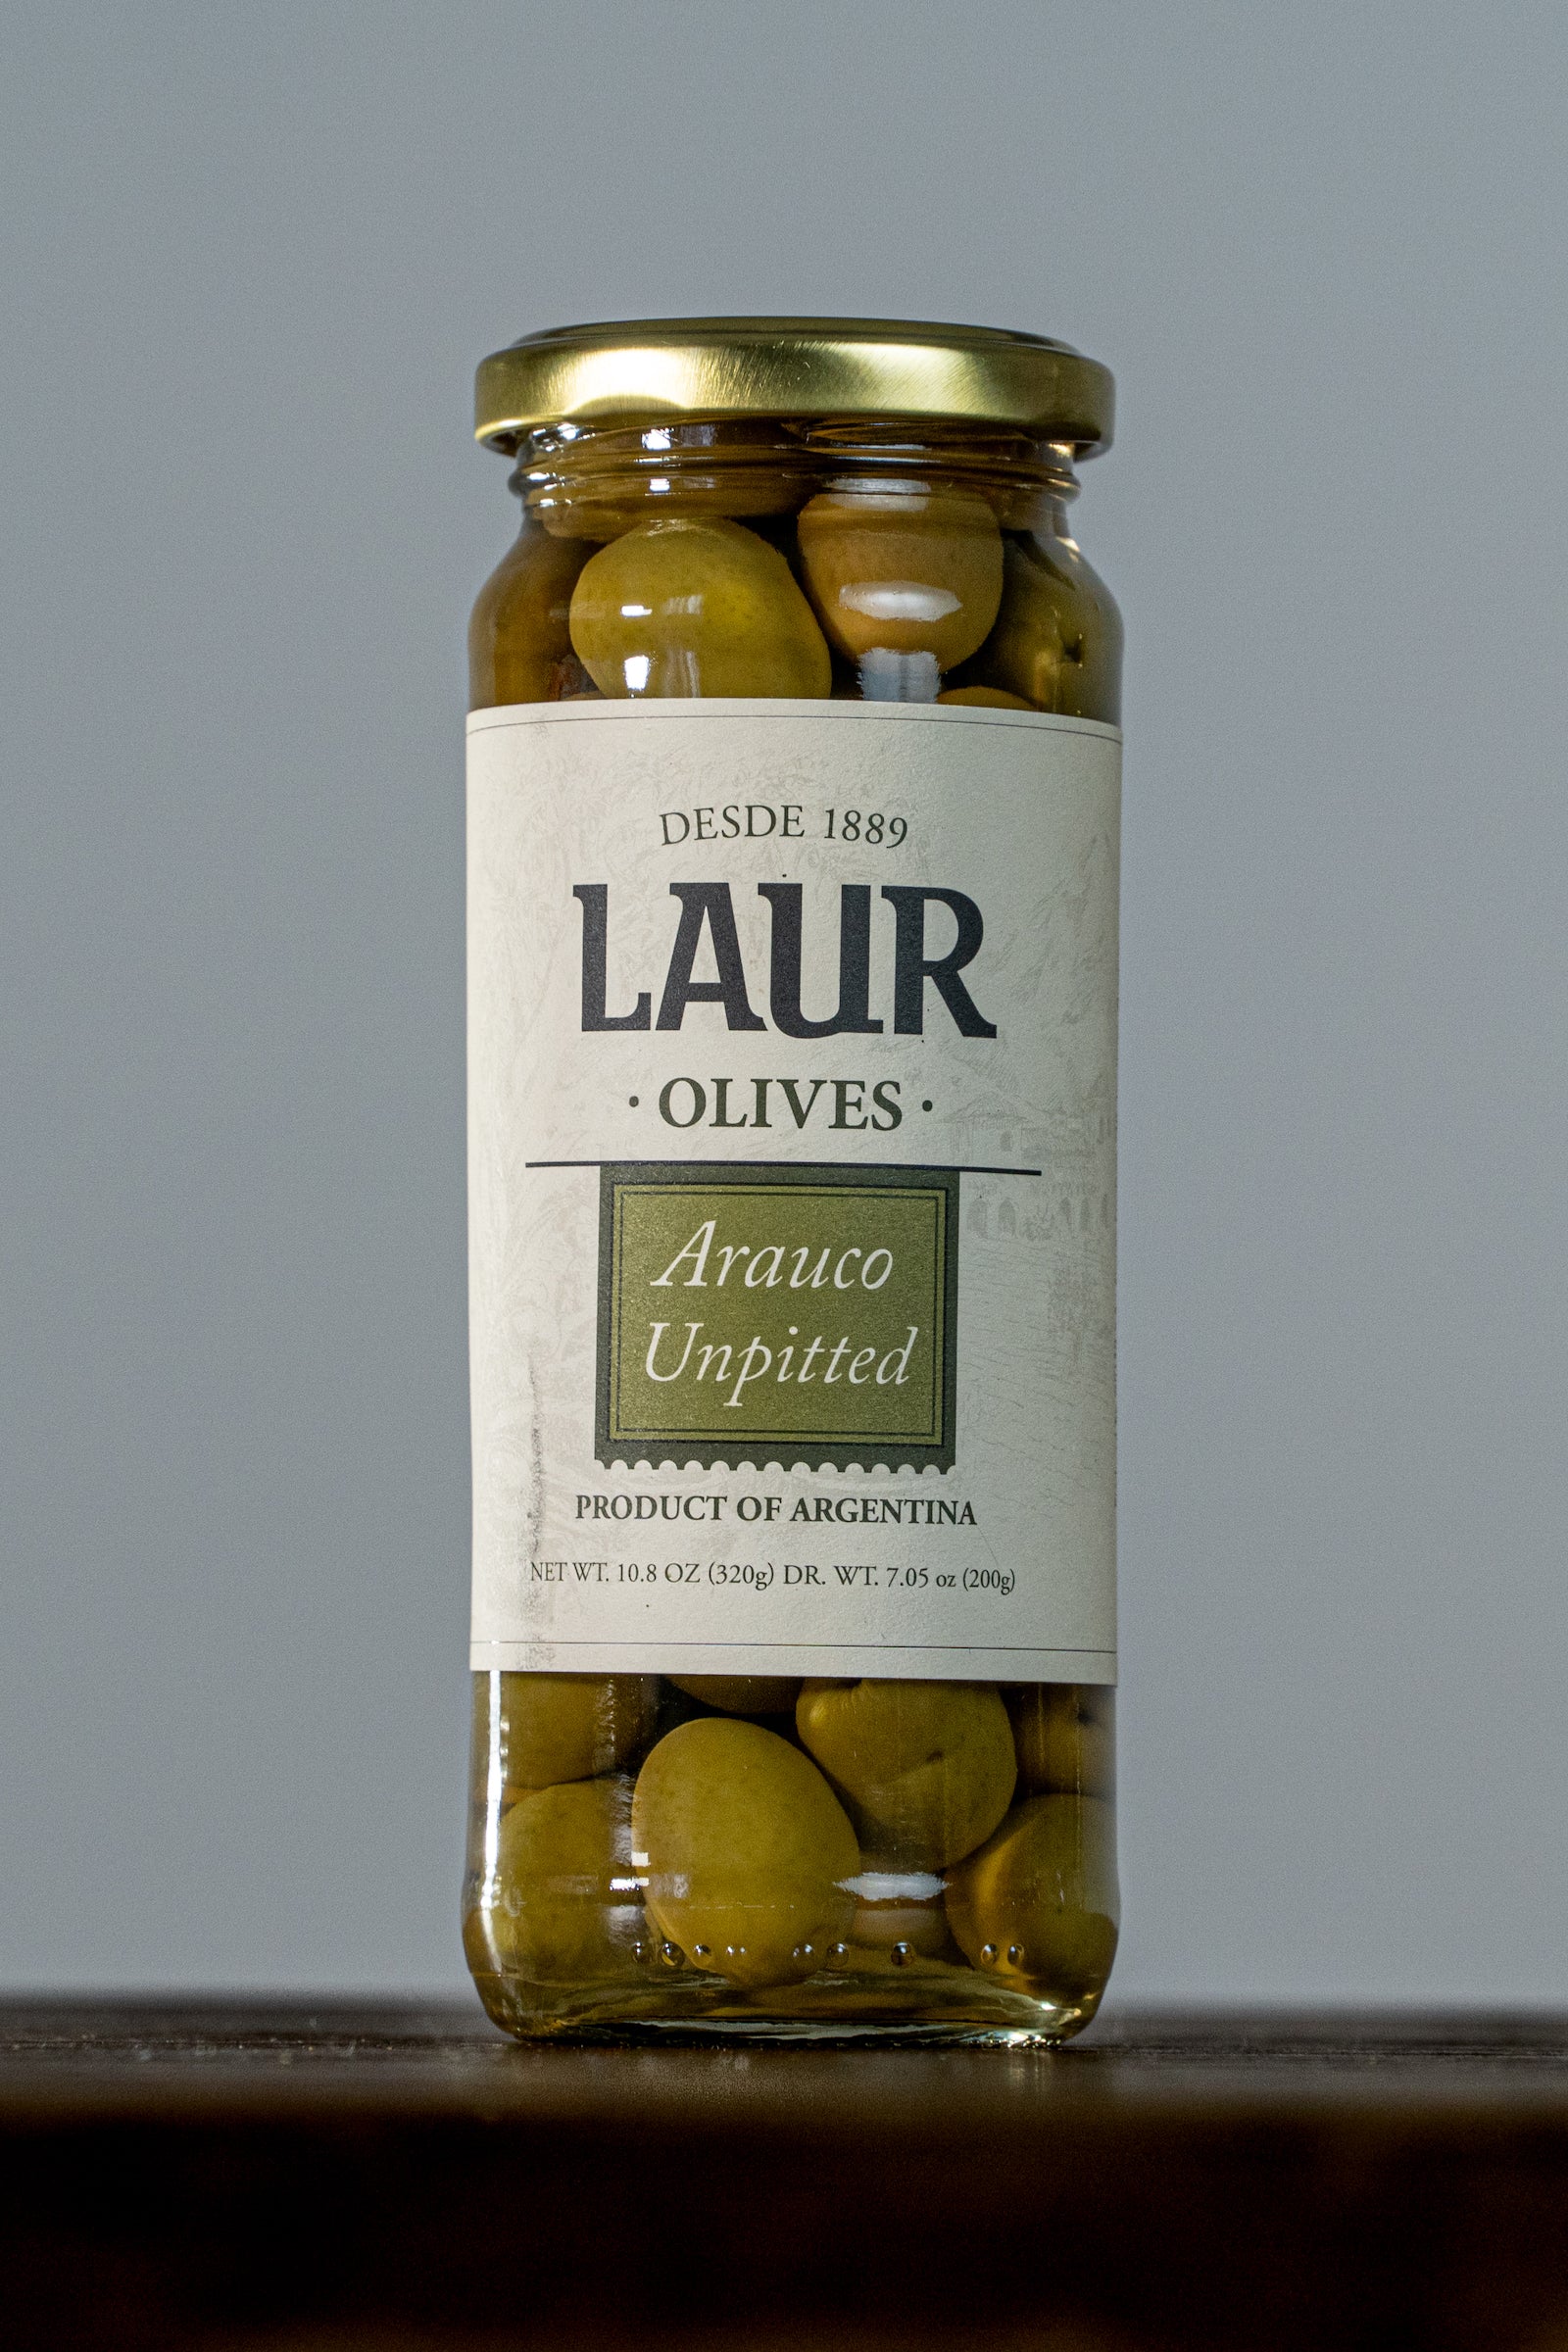 Green Olives In Extra Virgin Olive Oil (Unpitted)